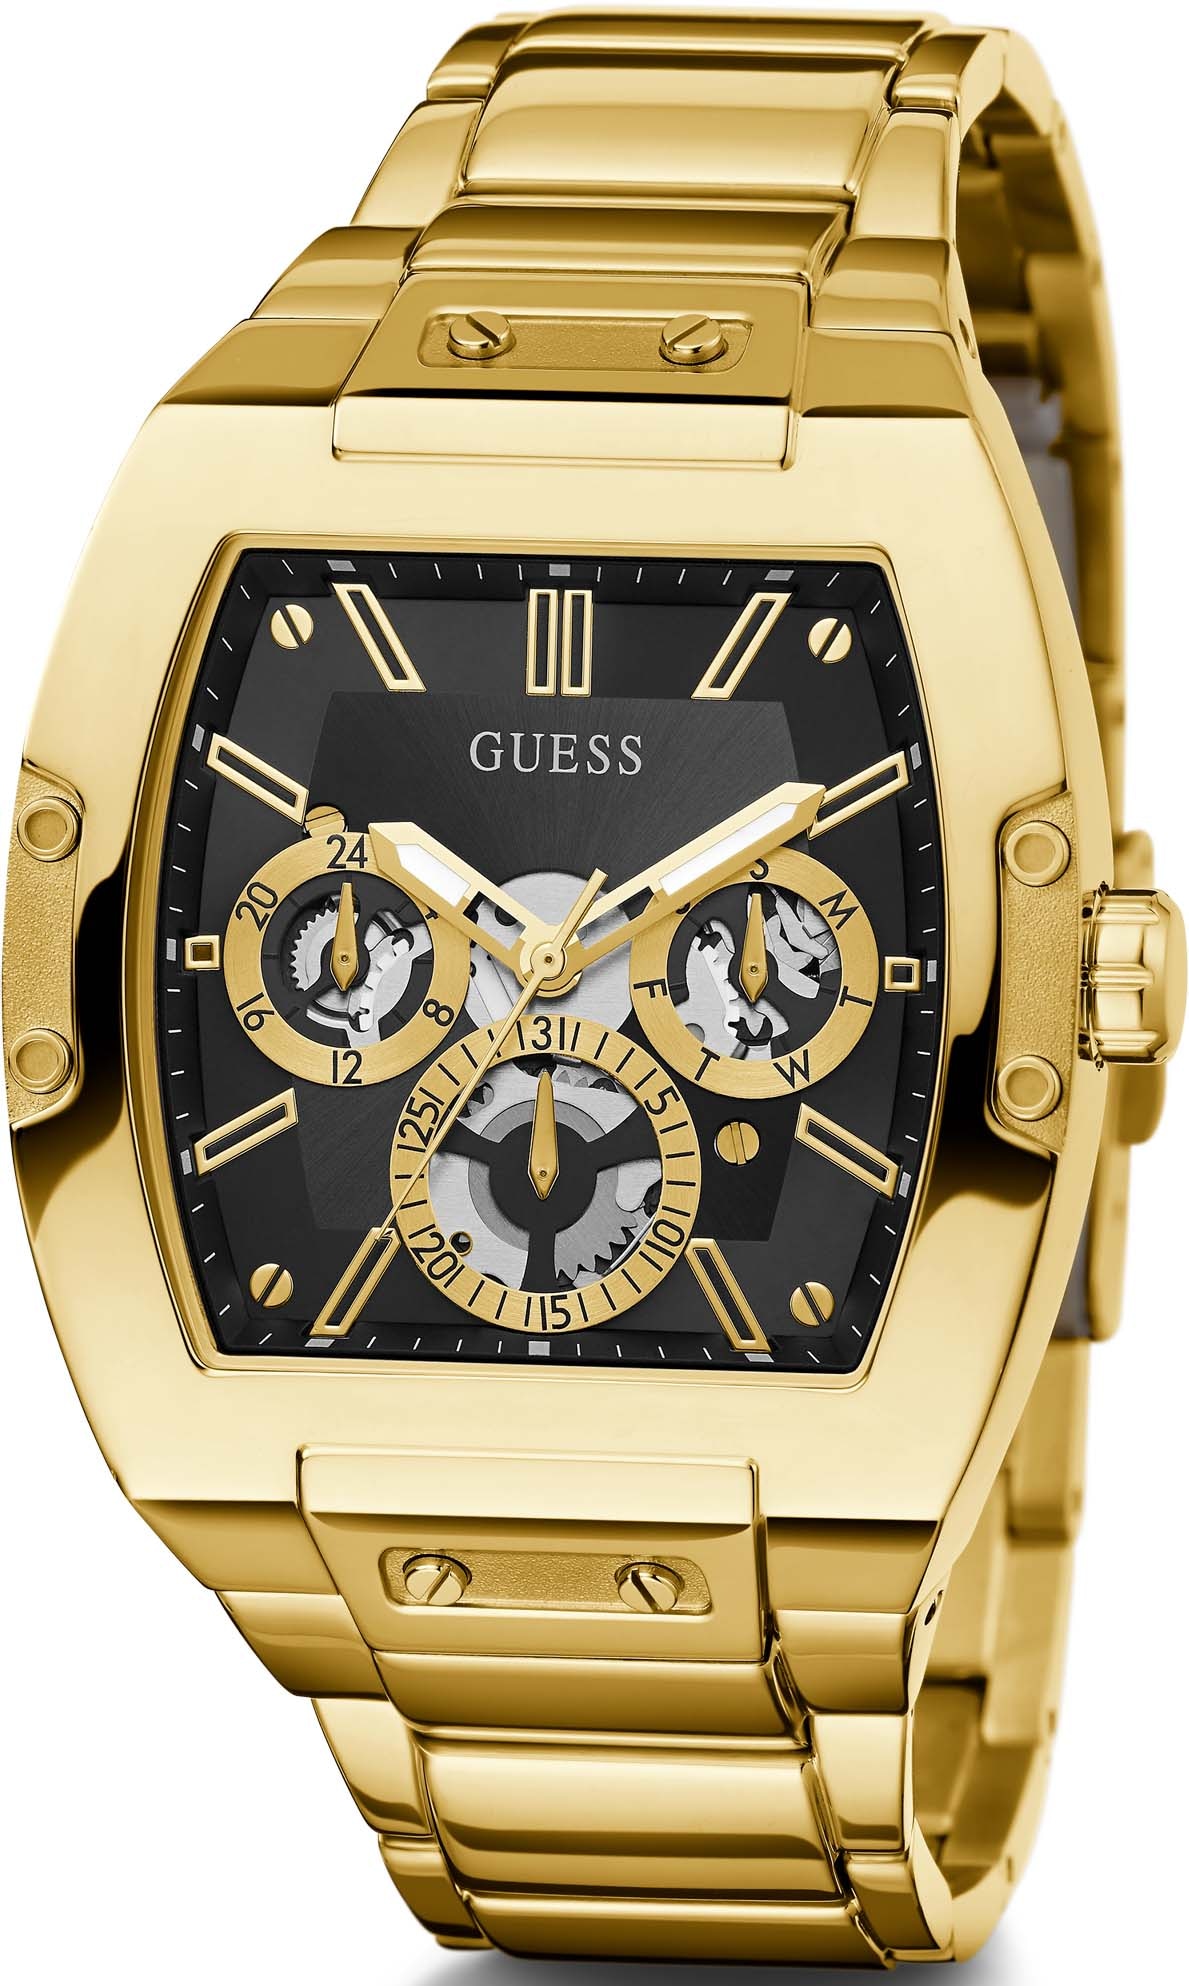 ♕ Multifunktionsuhr »GW0456G1« Guess bei